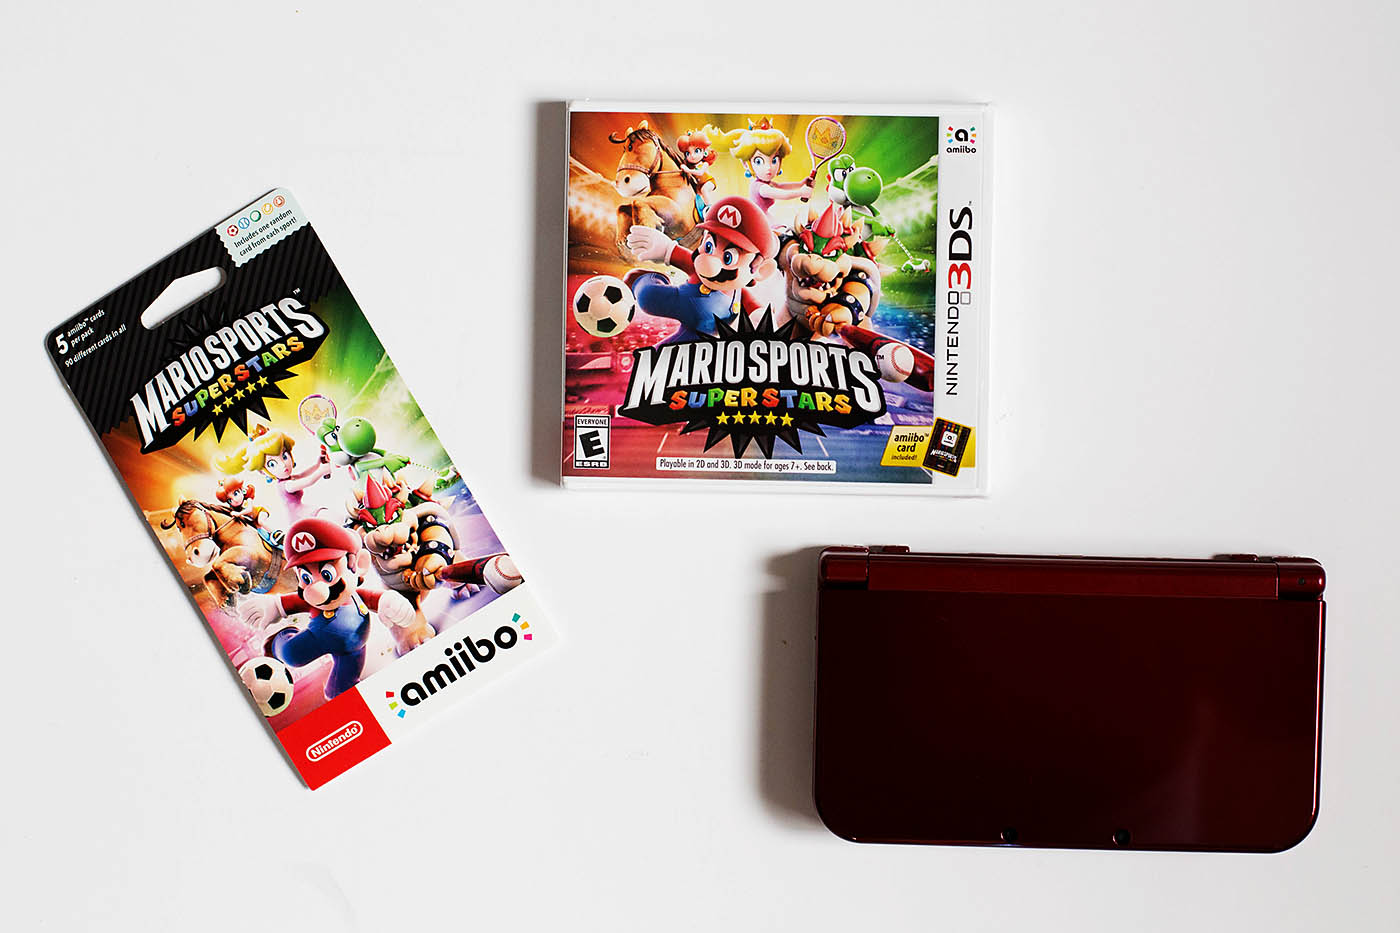 Mario Sports Superstars overview and kid review